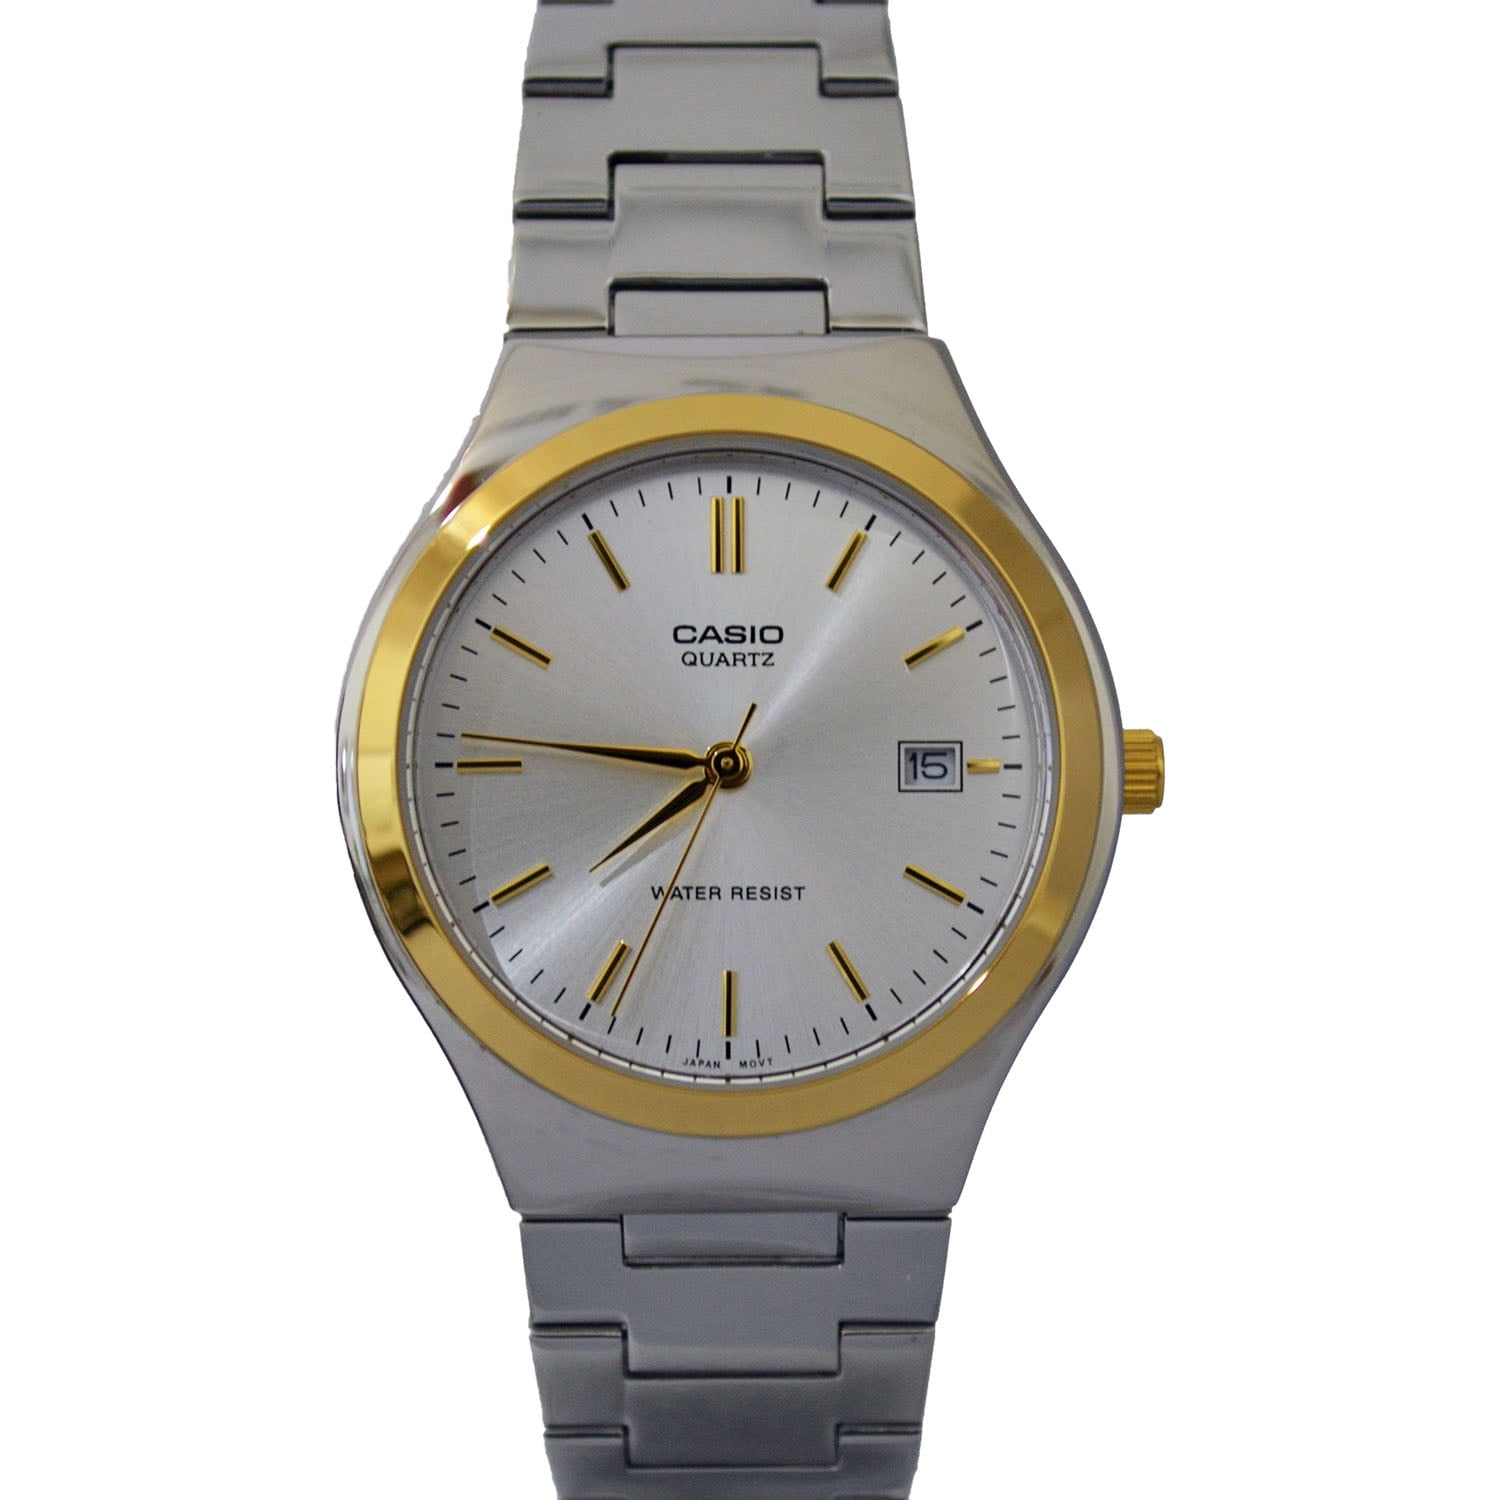 Casio - Casio Mens Two Tone Stainless Steel Analog Dress Watch w Casio Analog Stainless Steel Watch